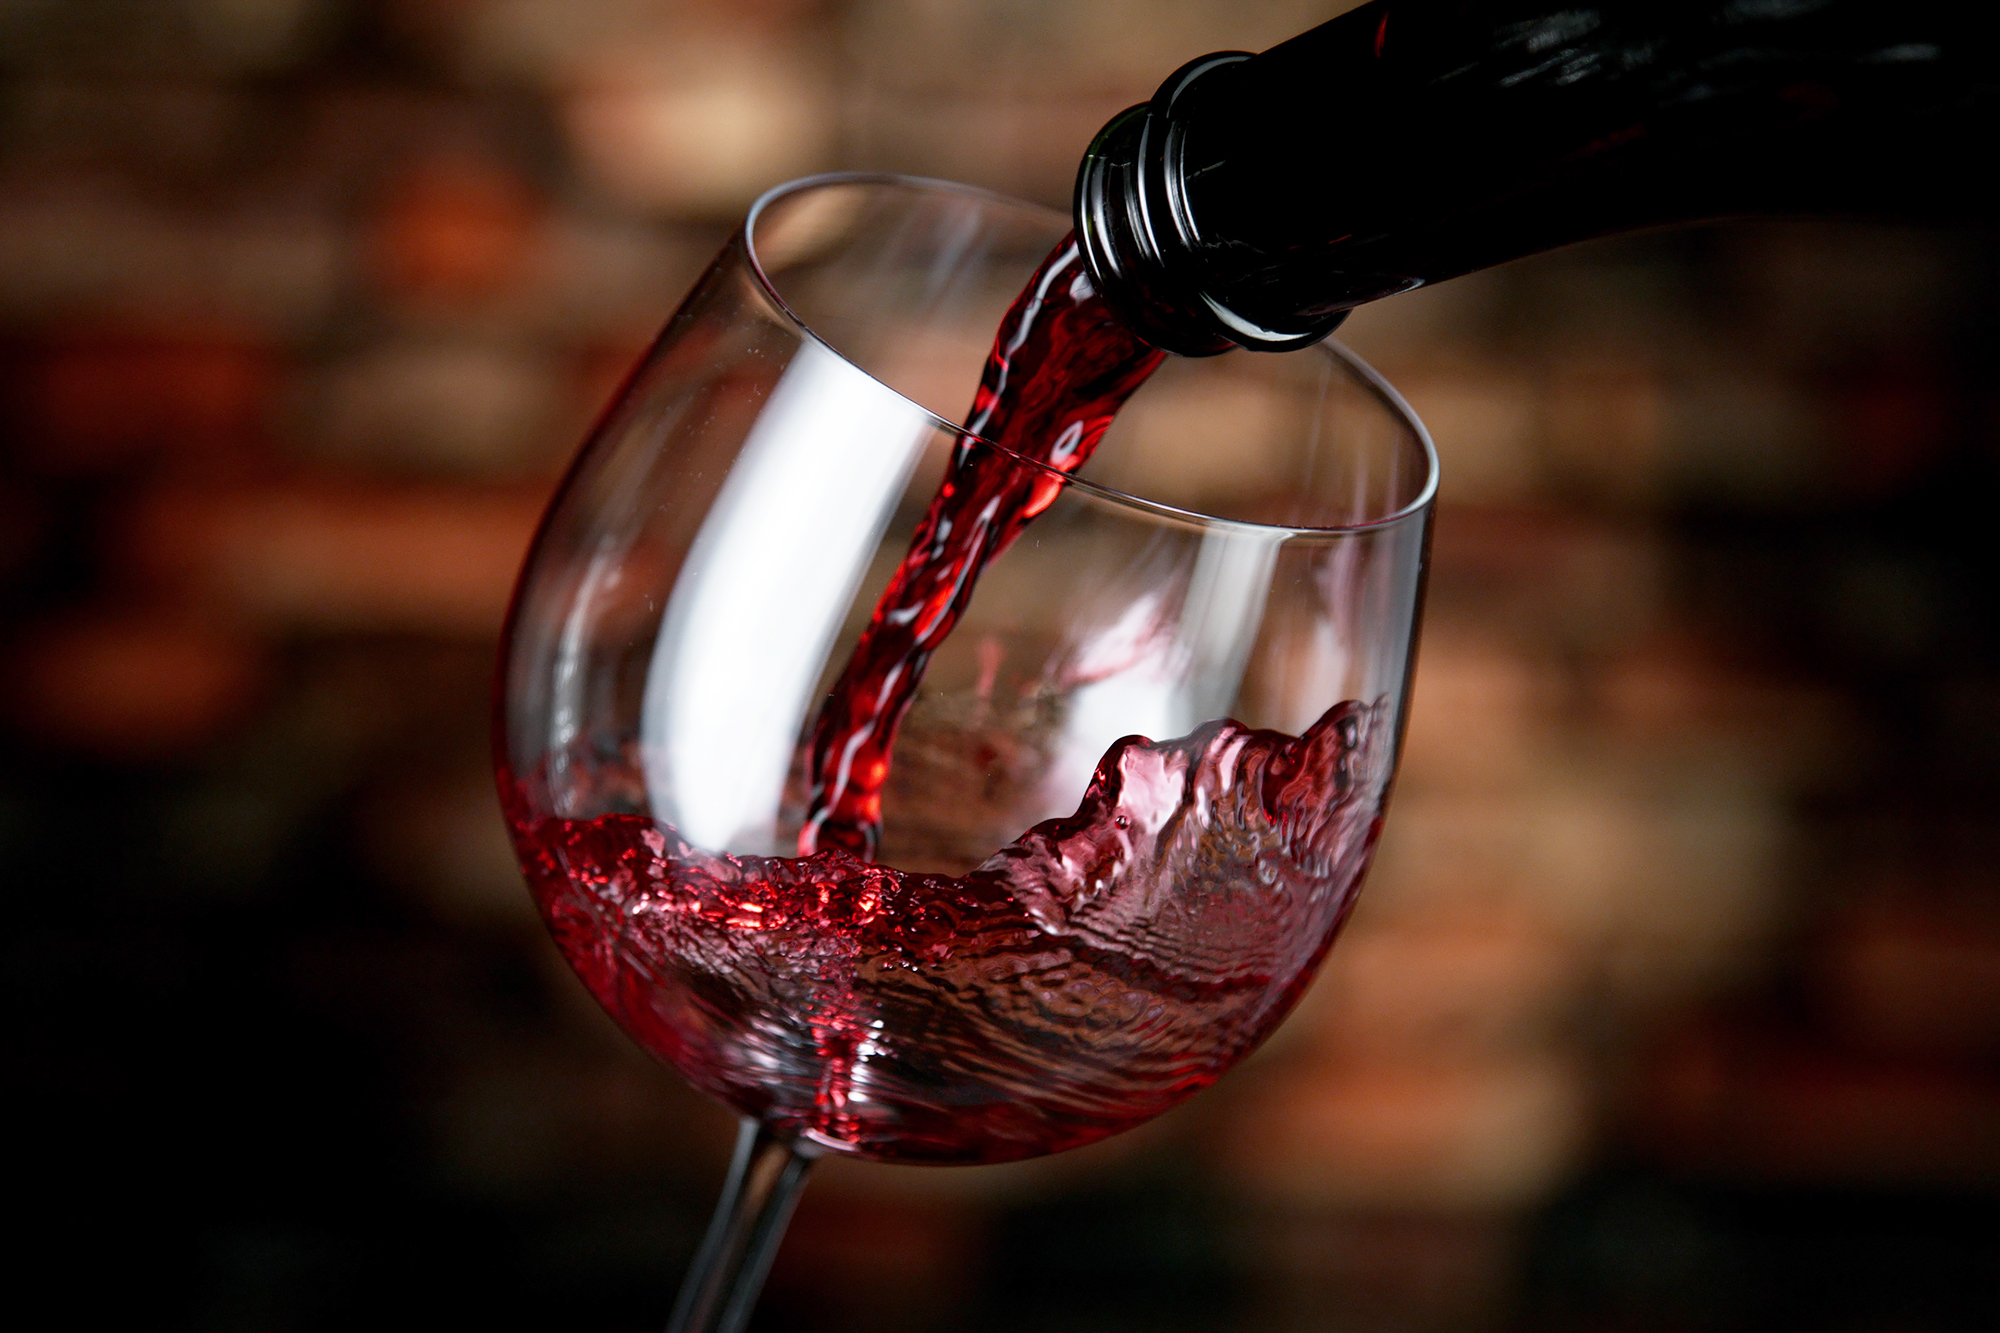 How does red wine delivery help in lowering cholesterol?